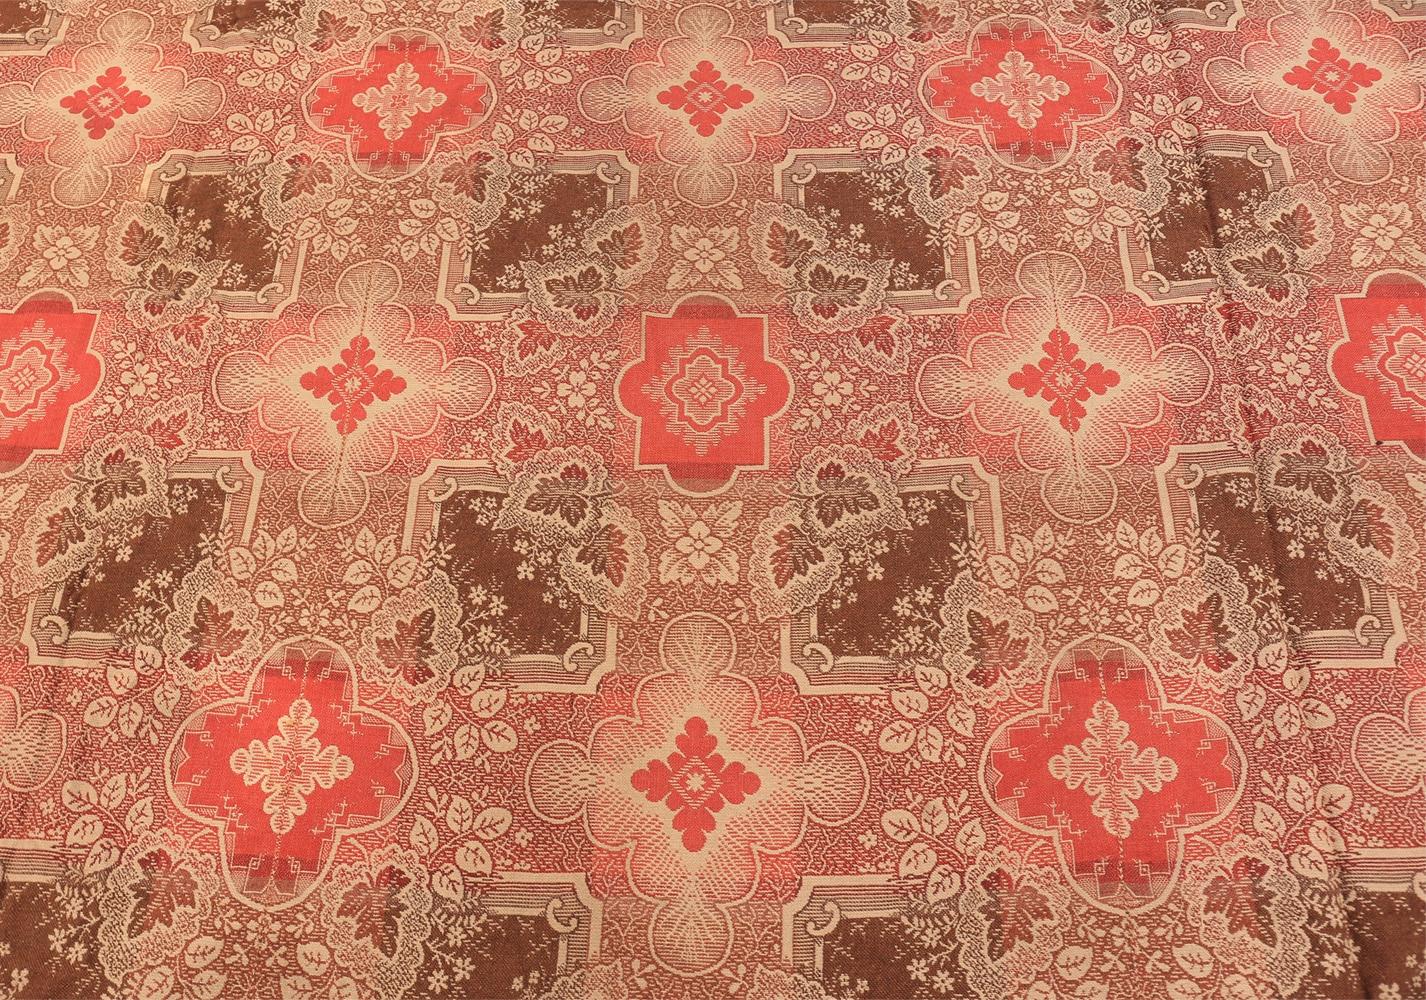 Large all-over design antique American Ingrain rug, country of origin: America, circa 1920. Size: 13 ft 4 in x 14 ft 5 in (4.06 m x 4.39 m). 

This is a gorgeous American ingrain rug. This a big beautiful rug fit for larger spaces. The high quality